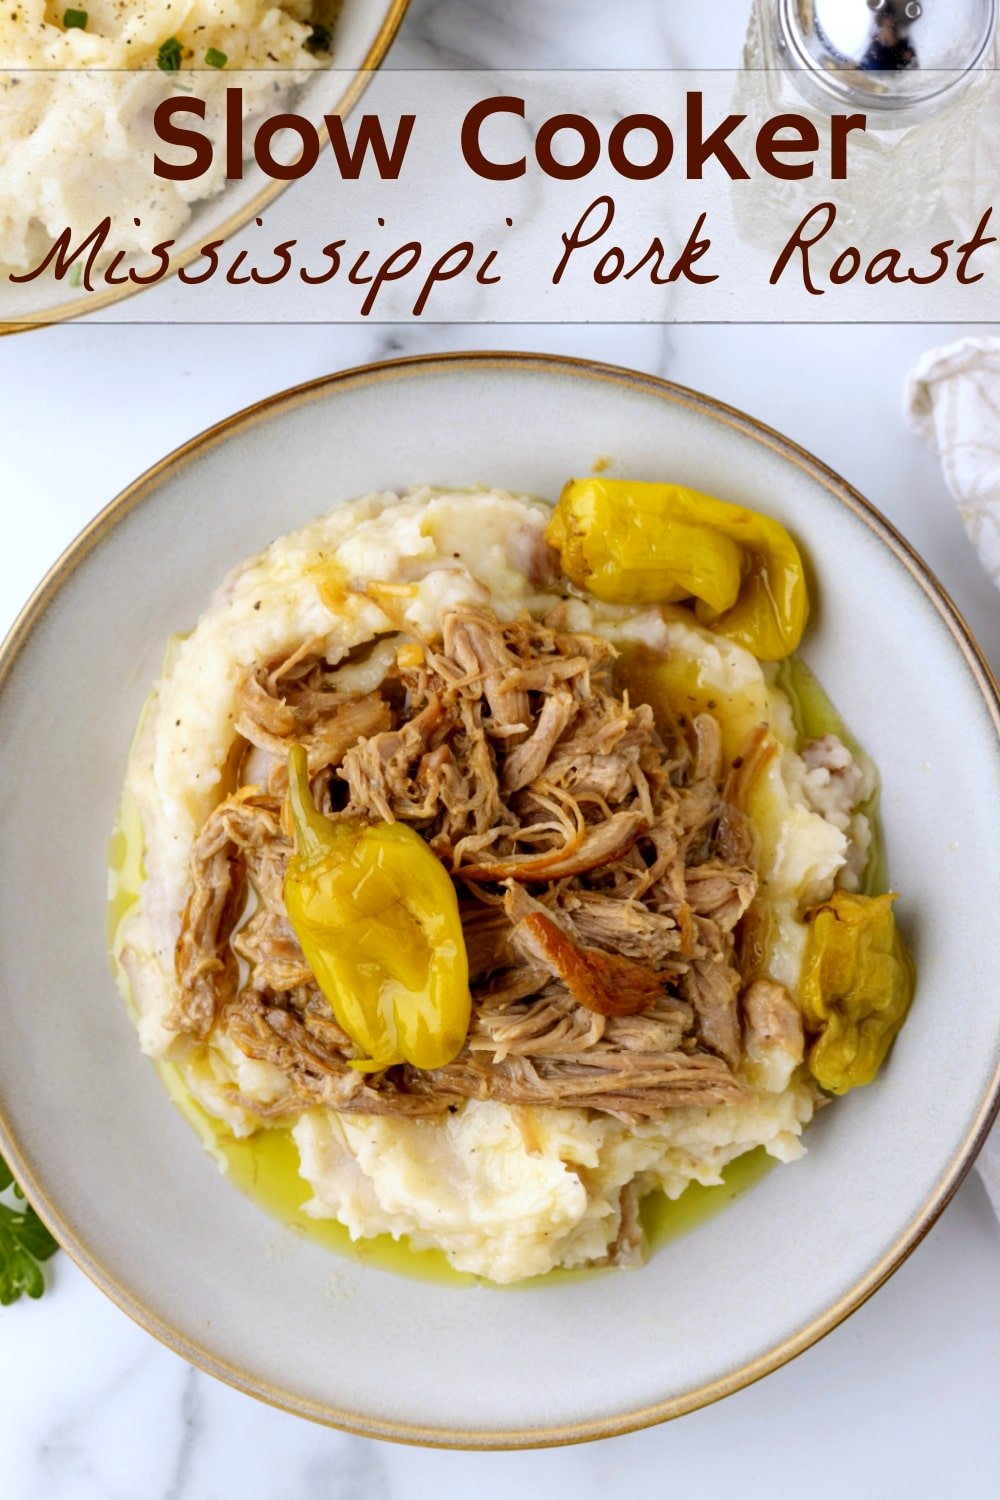 Mississippi pork roast made in the slow cooker takes only ten minutes to prepare and is packed with mouth-watering flavor even your pickiest eaters will love. via @cmpollak1